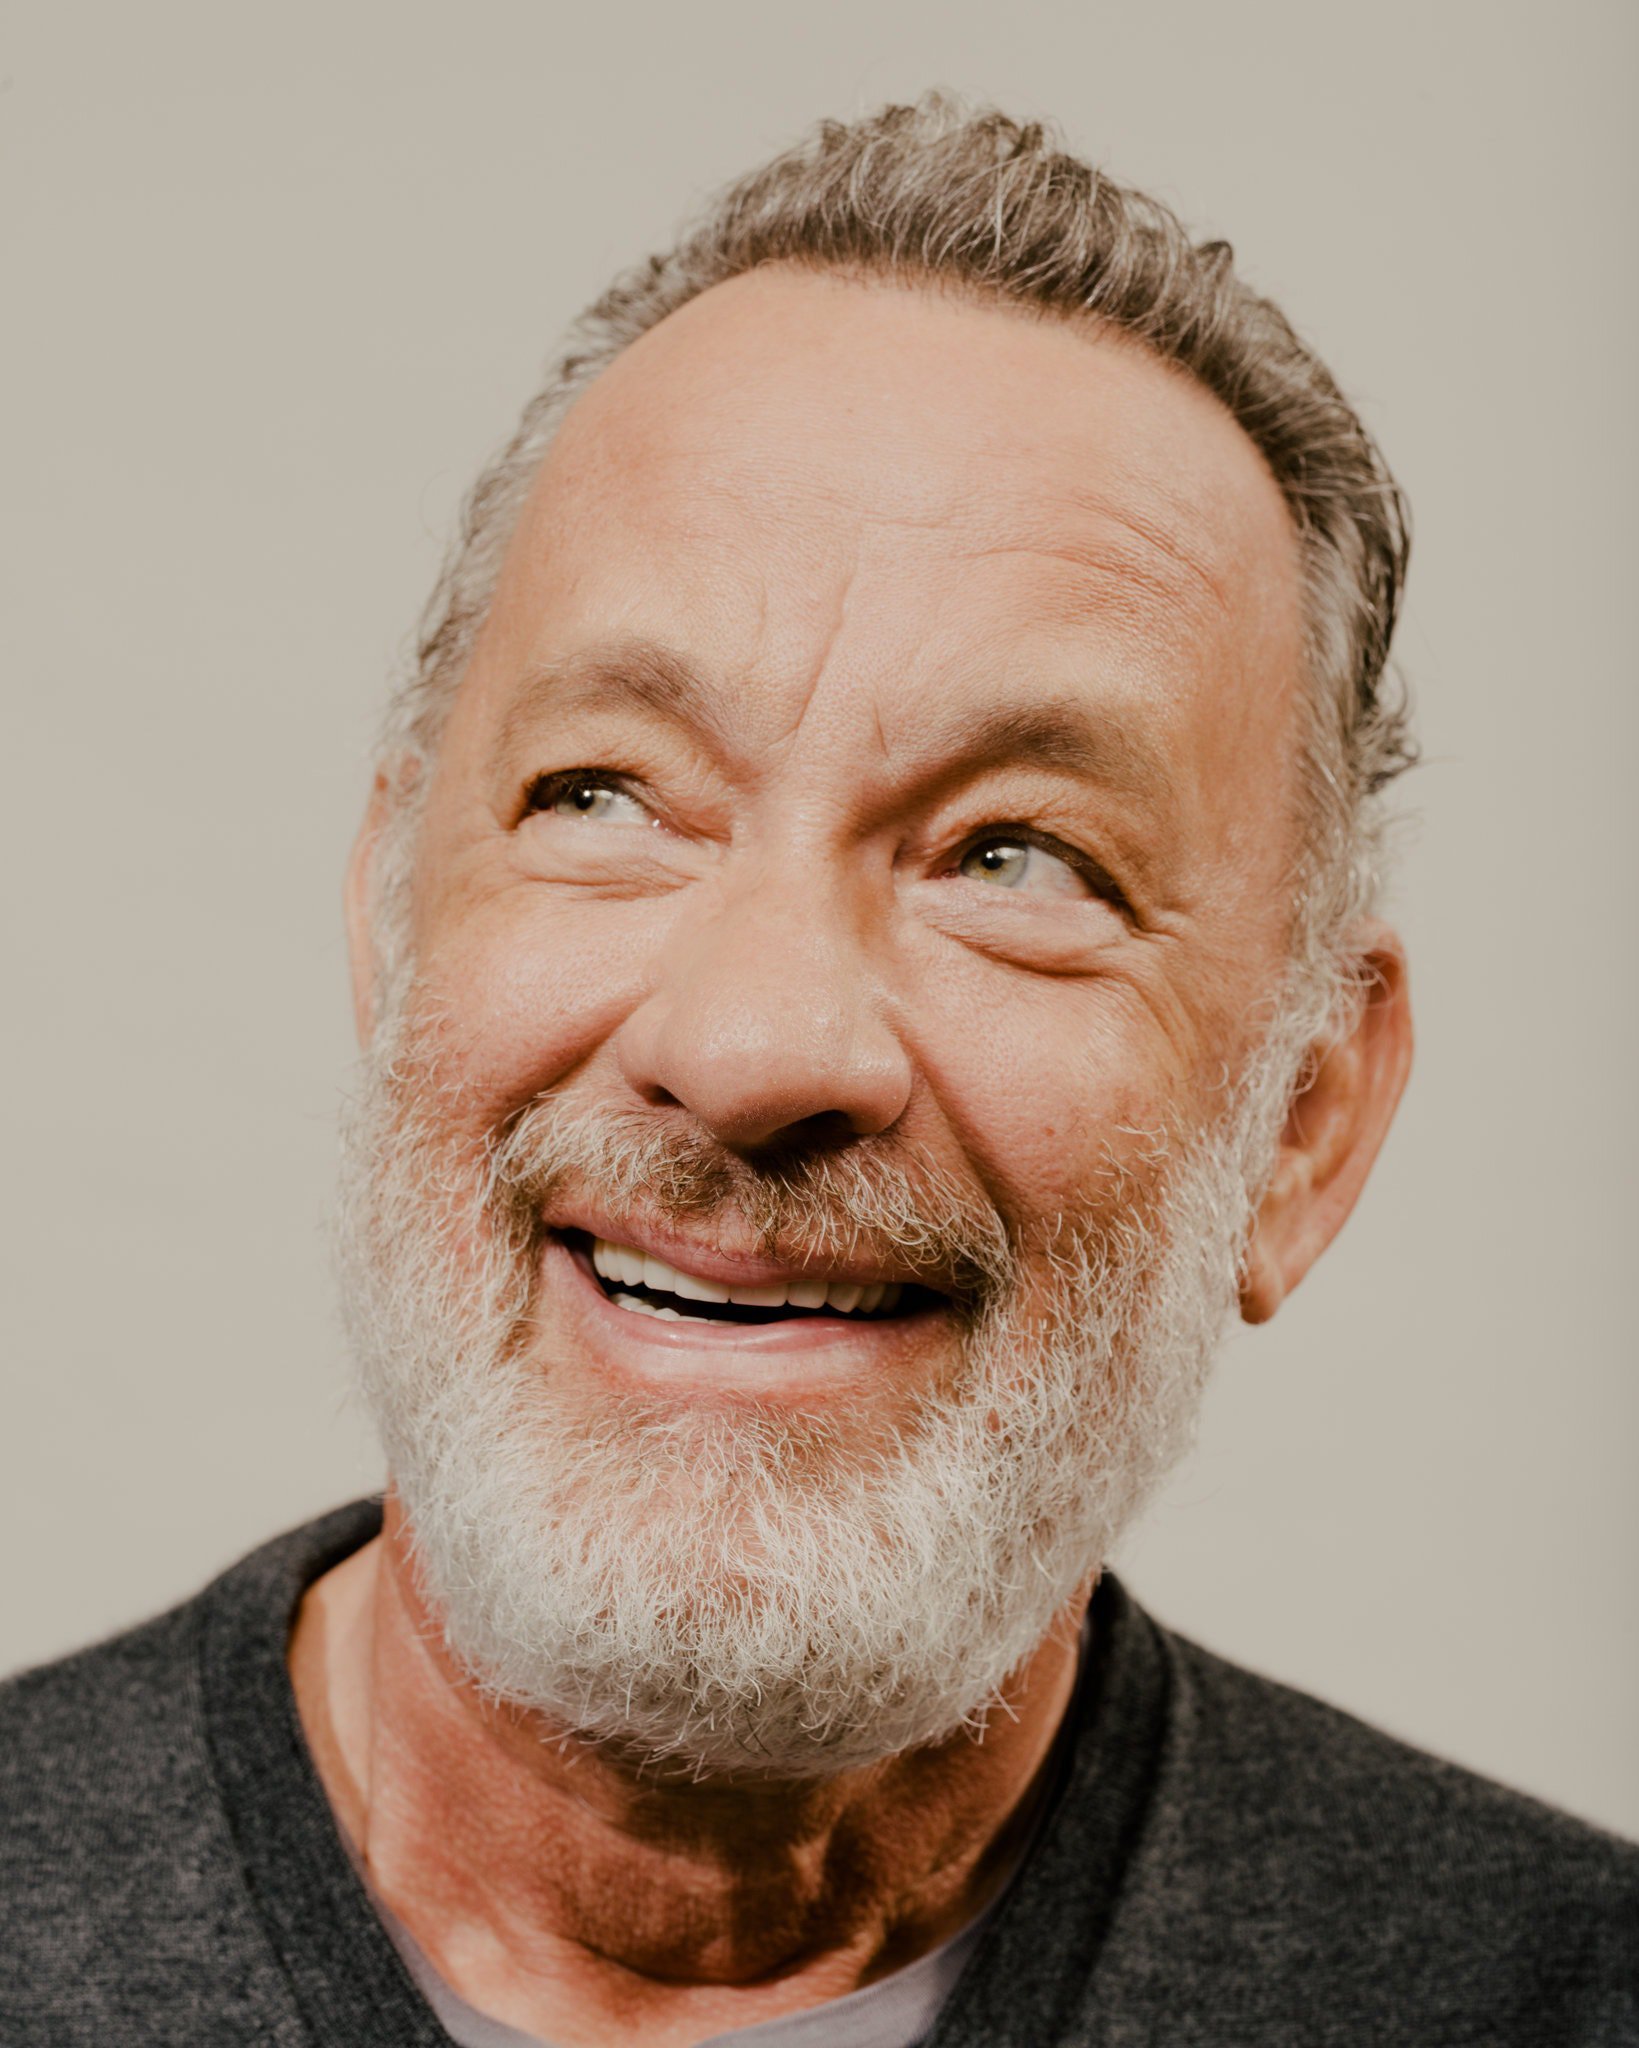 Just Good Tom Hanks, 2019. - Tom Hanks, Actors and actresses, Celebrities, The photo, 2019, PHOTOSESSION, Longpost